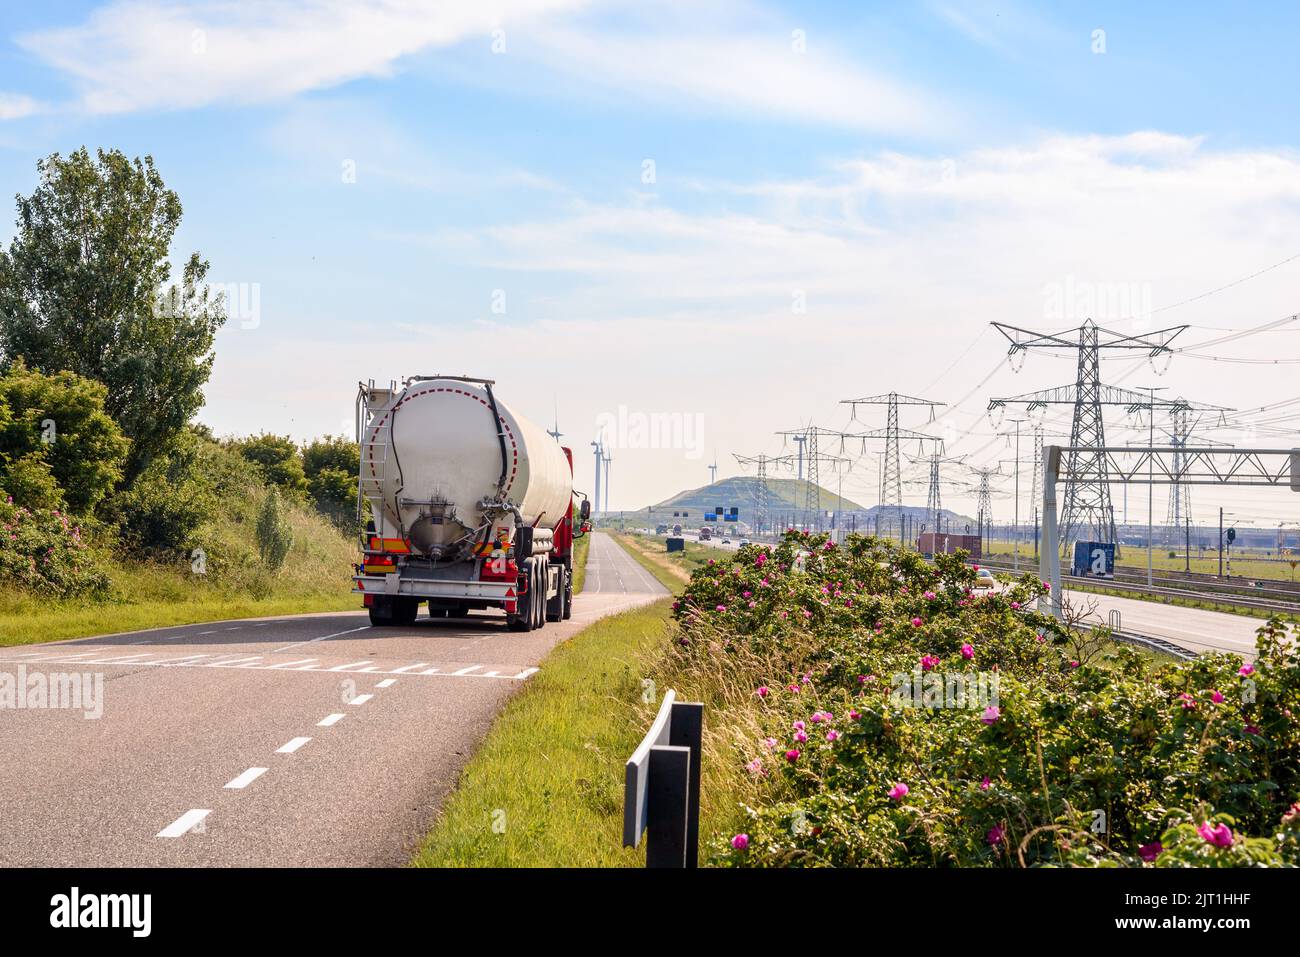 Bulk tanker lorry on a narrow road running along a motorway and railway in a port area on a sunny summer day. Electricity pylons are in background. Stock Photo